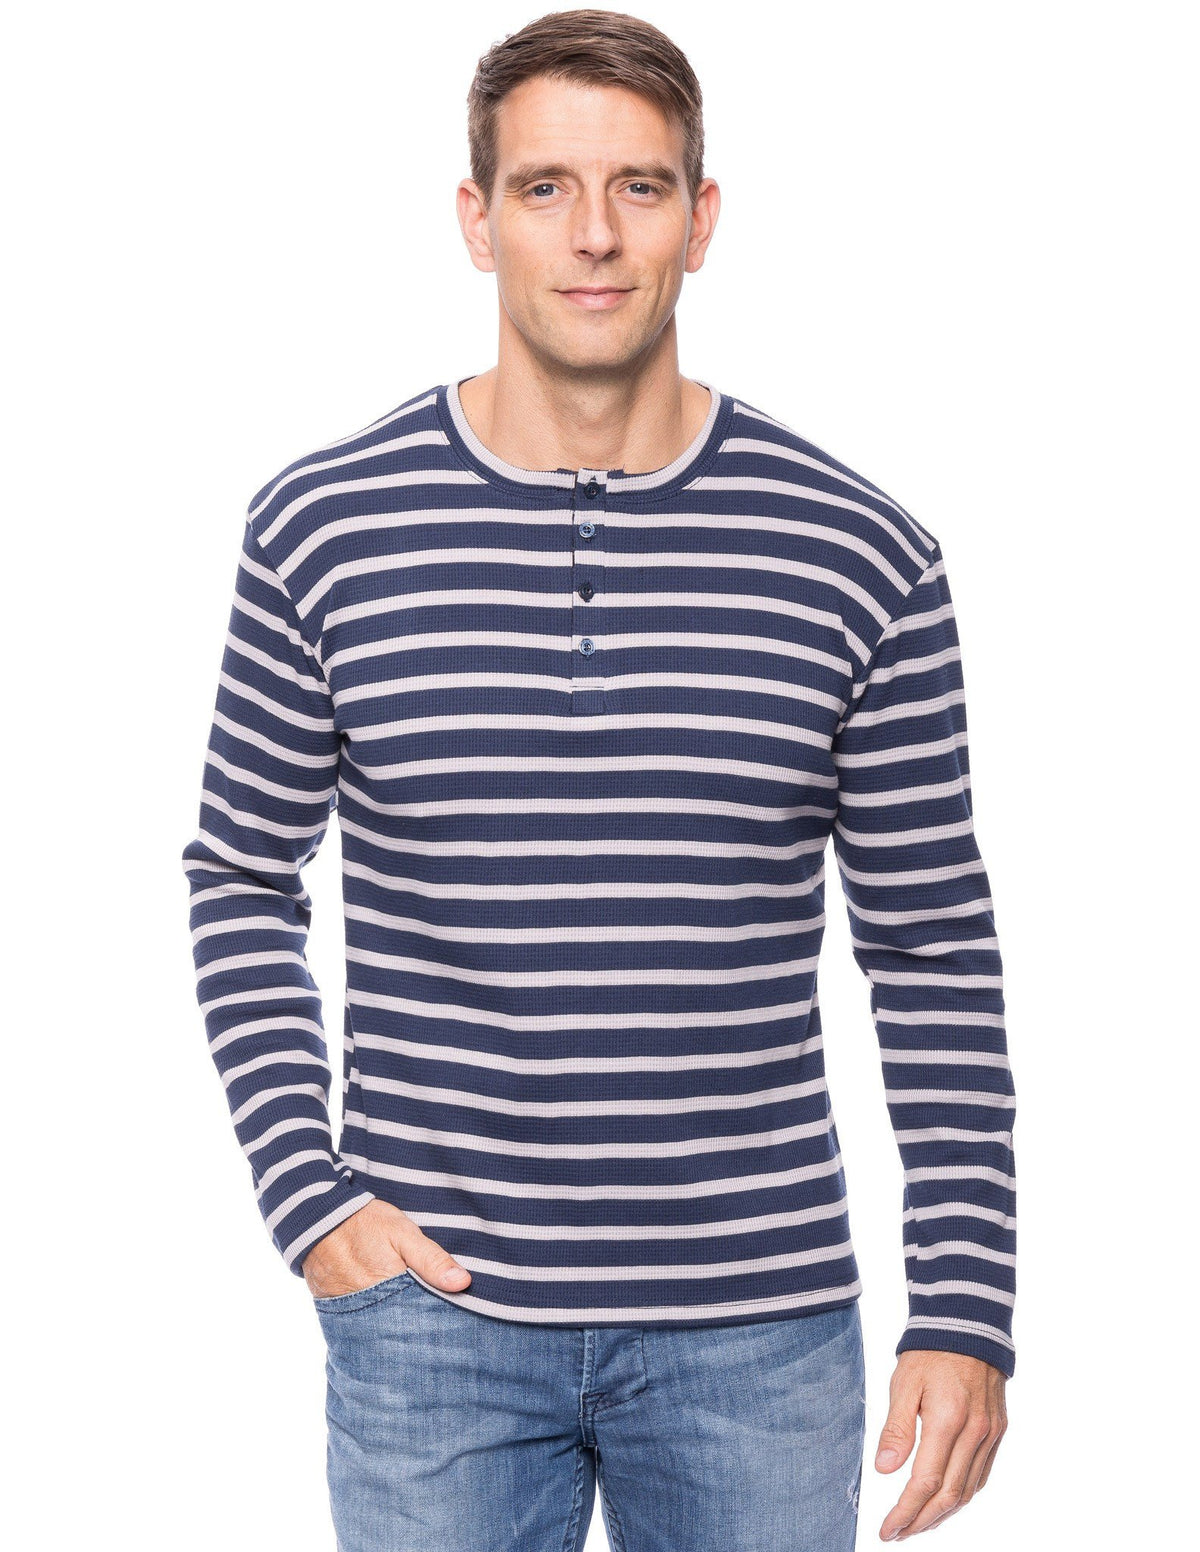 Men's Solid Thermal Henley Long Sleeve T-shirts - Stripes Navy/Heather Grey